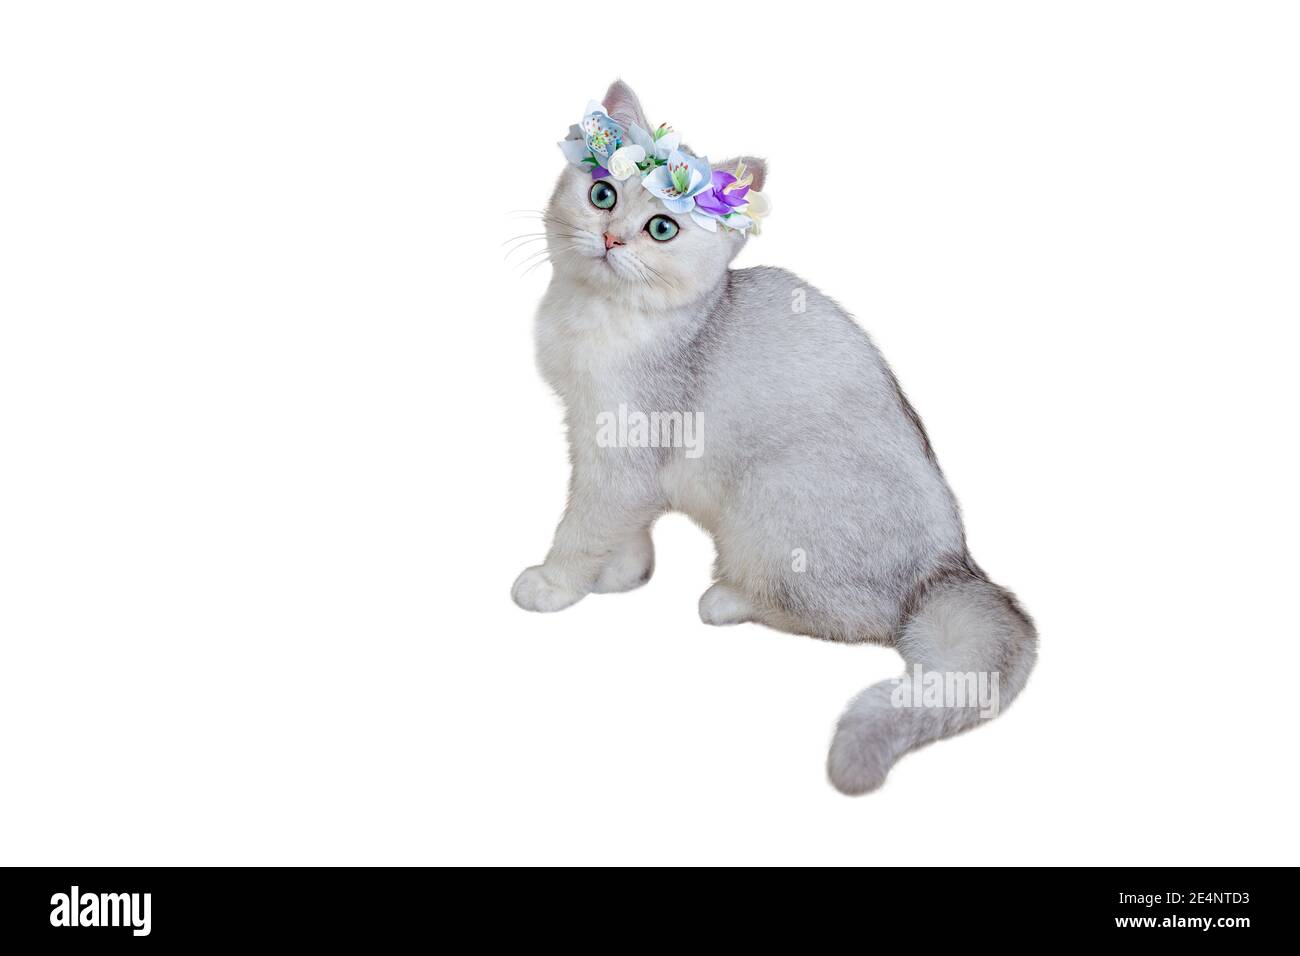 Beautiful gray kitten British breed in a blue flower crown sitting on a white background. Stock Photo